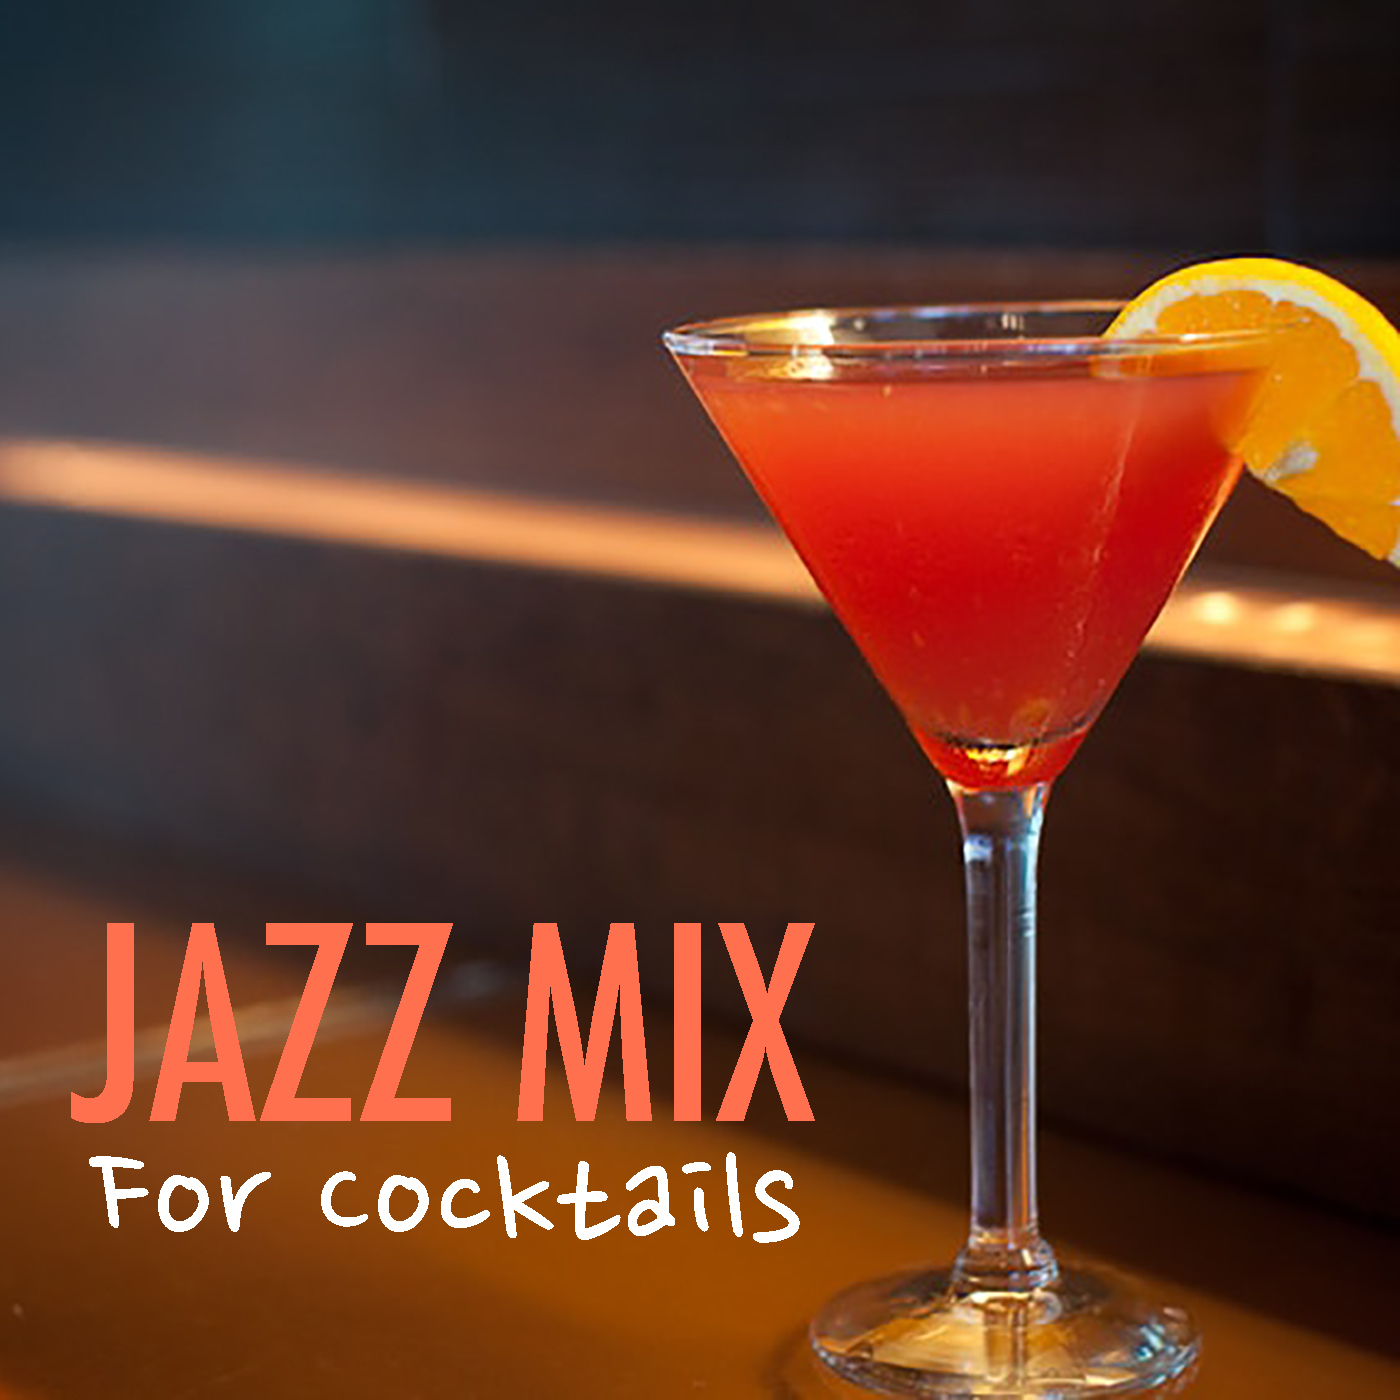 Jazz Mix For Cocktails